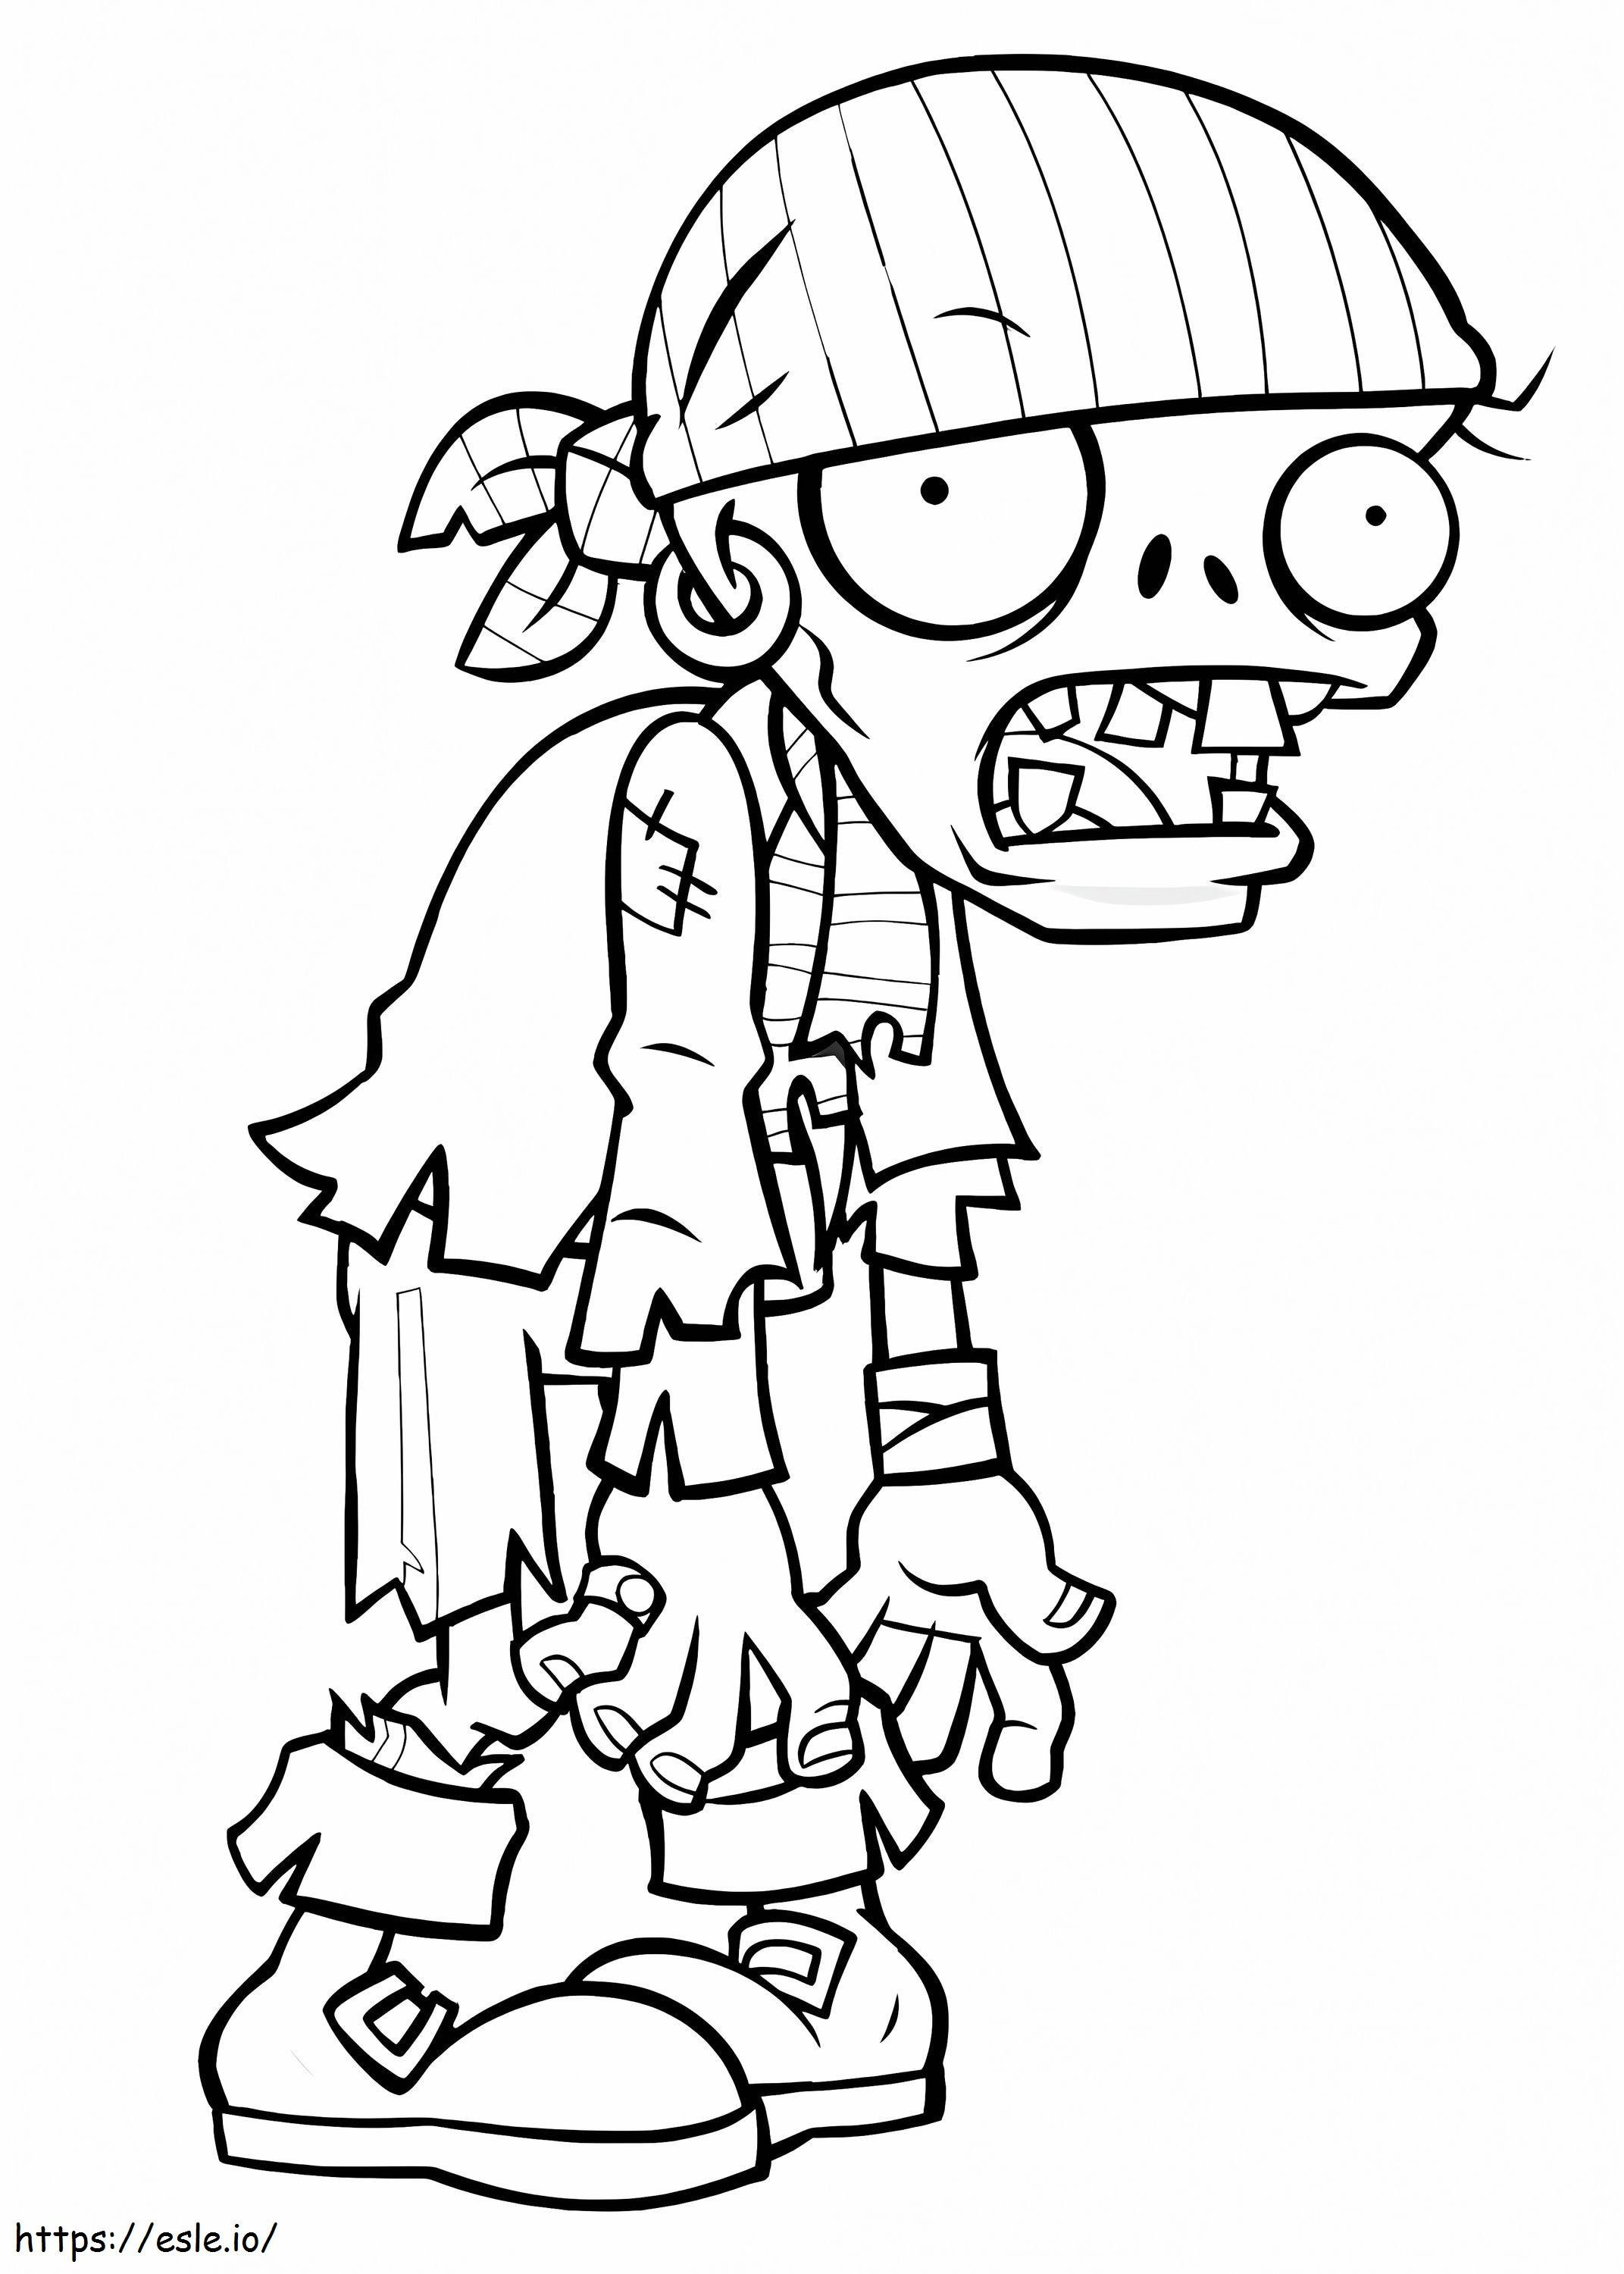 Zombie Pirates coloring page